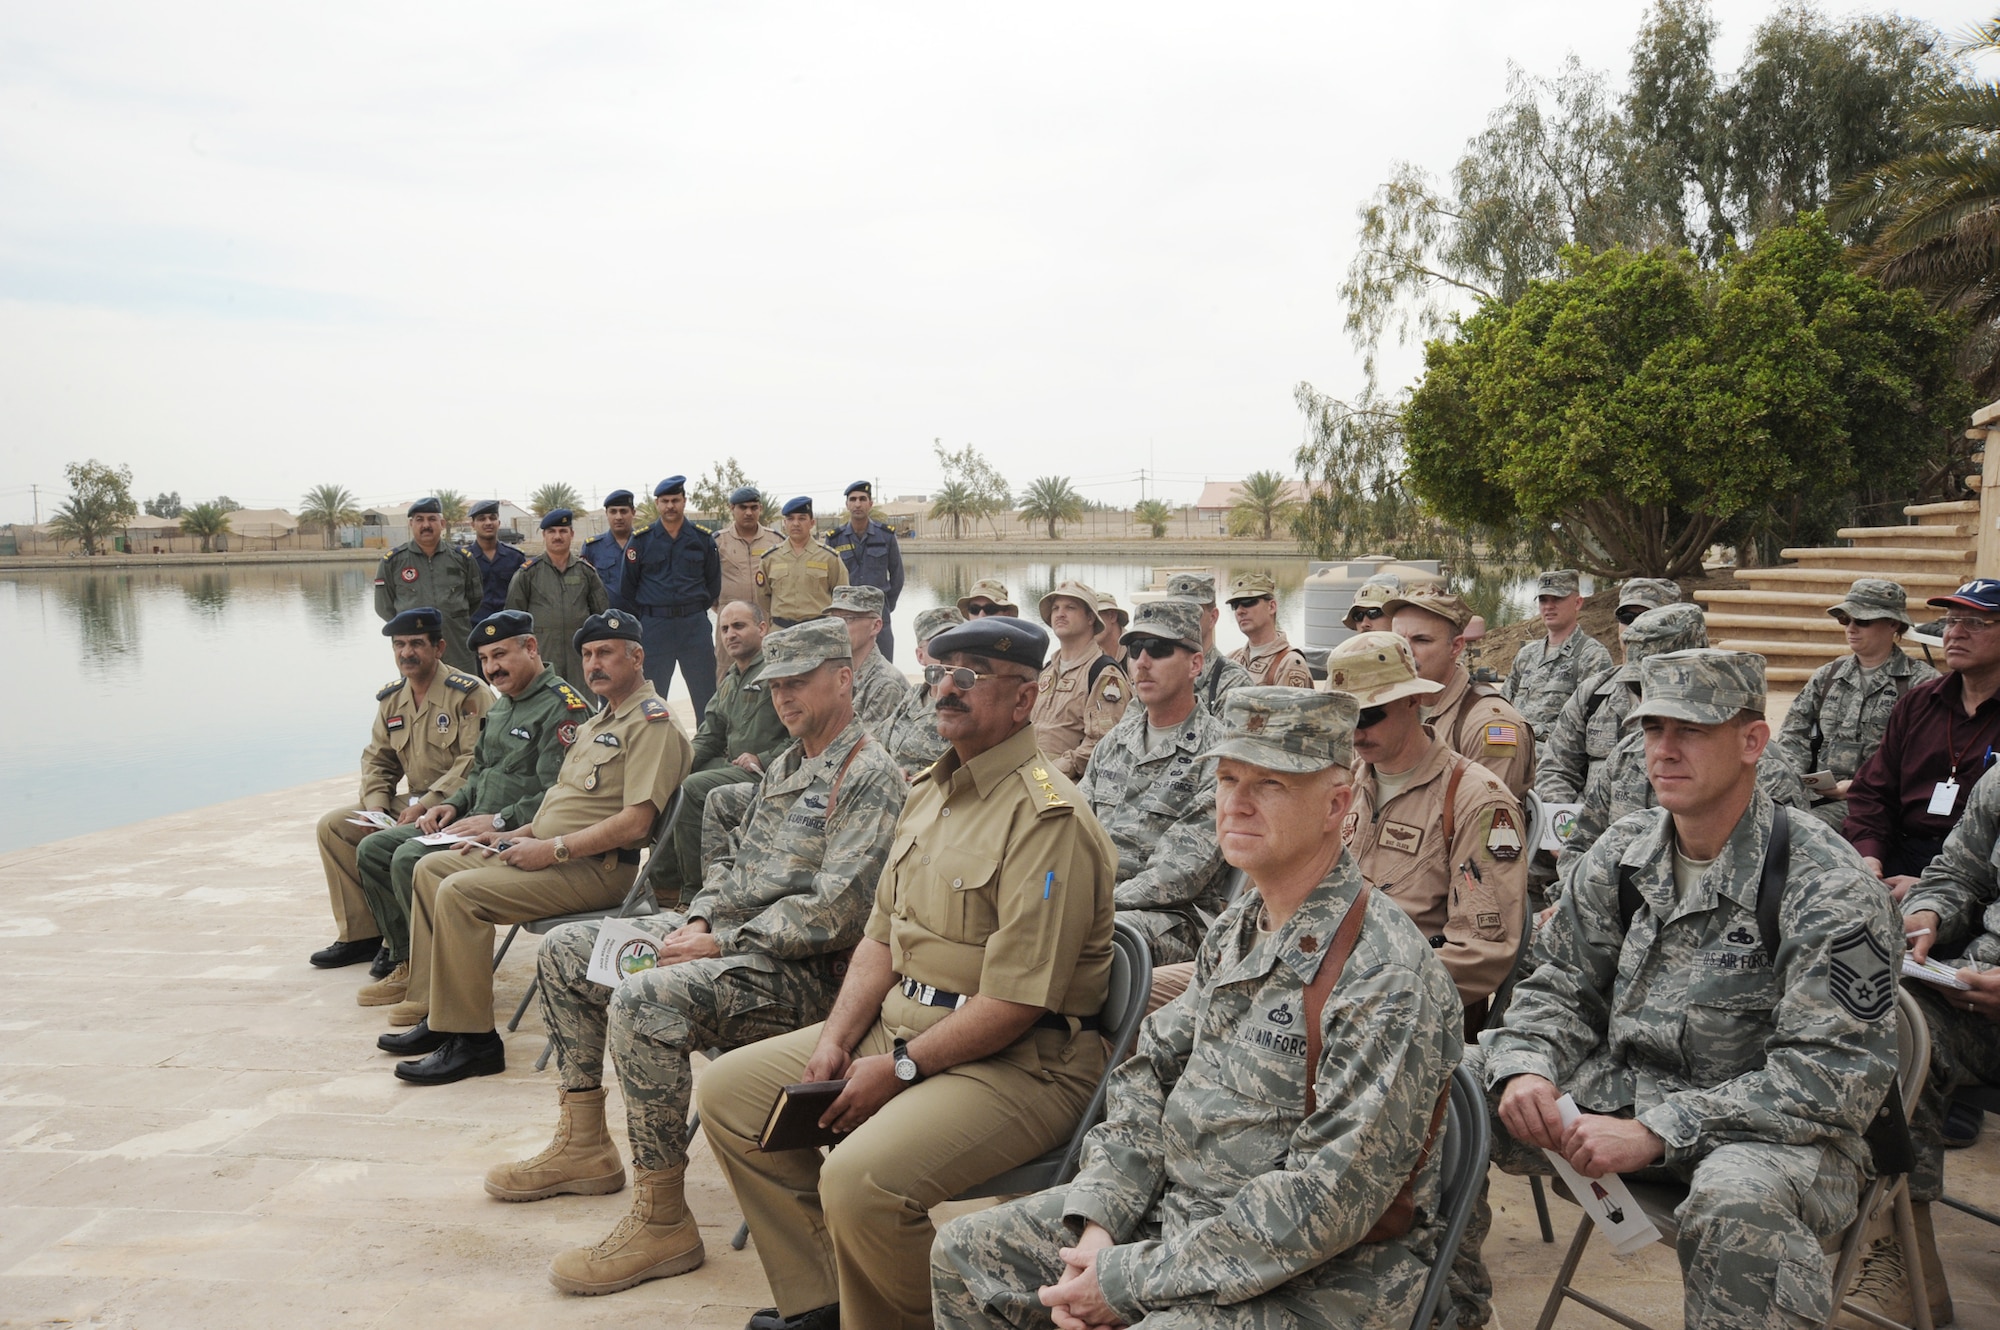 A crowd gathers at Camp Victory, Iraq, March 25, 2010, for the graduation of the first class of Iraqi air force meteorology officers. The graduates will be sent to different locations throughout Iraq for 30 days of on-the-job training. Once the training is complete, some of the weather advisory officers will become instructors while others will begin their weather advisory mission for the Iraqi military. (U.S. Air Force photo/Master Sgt. Trish Bunting)